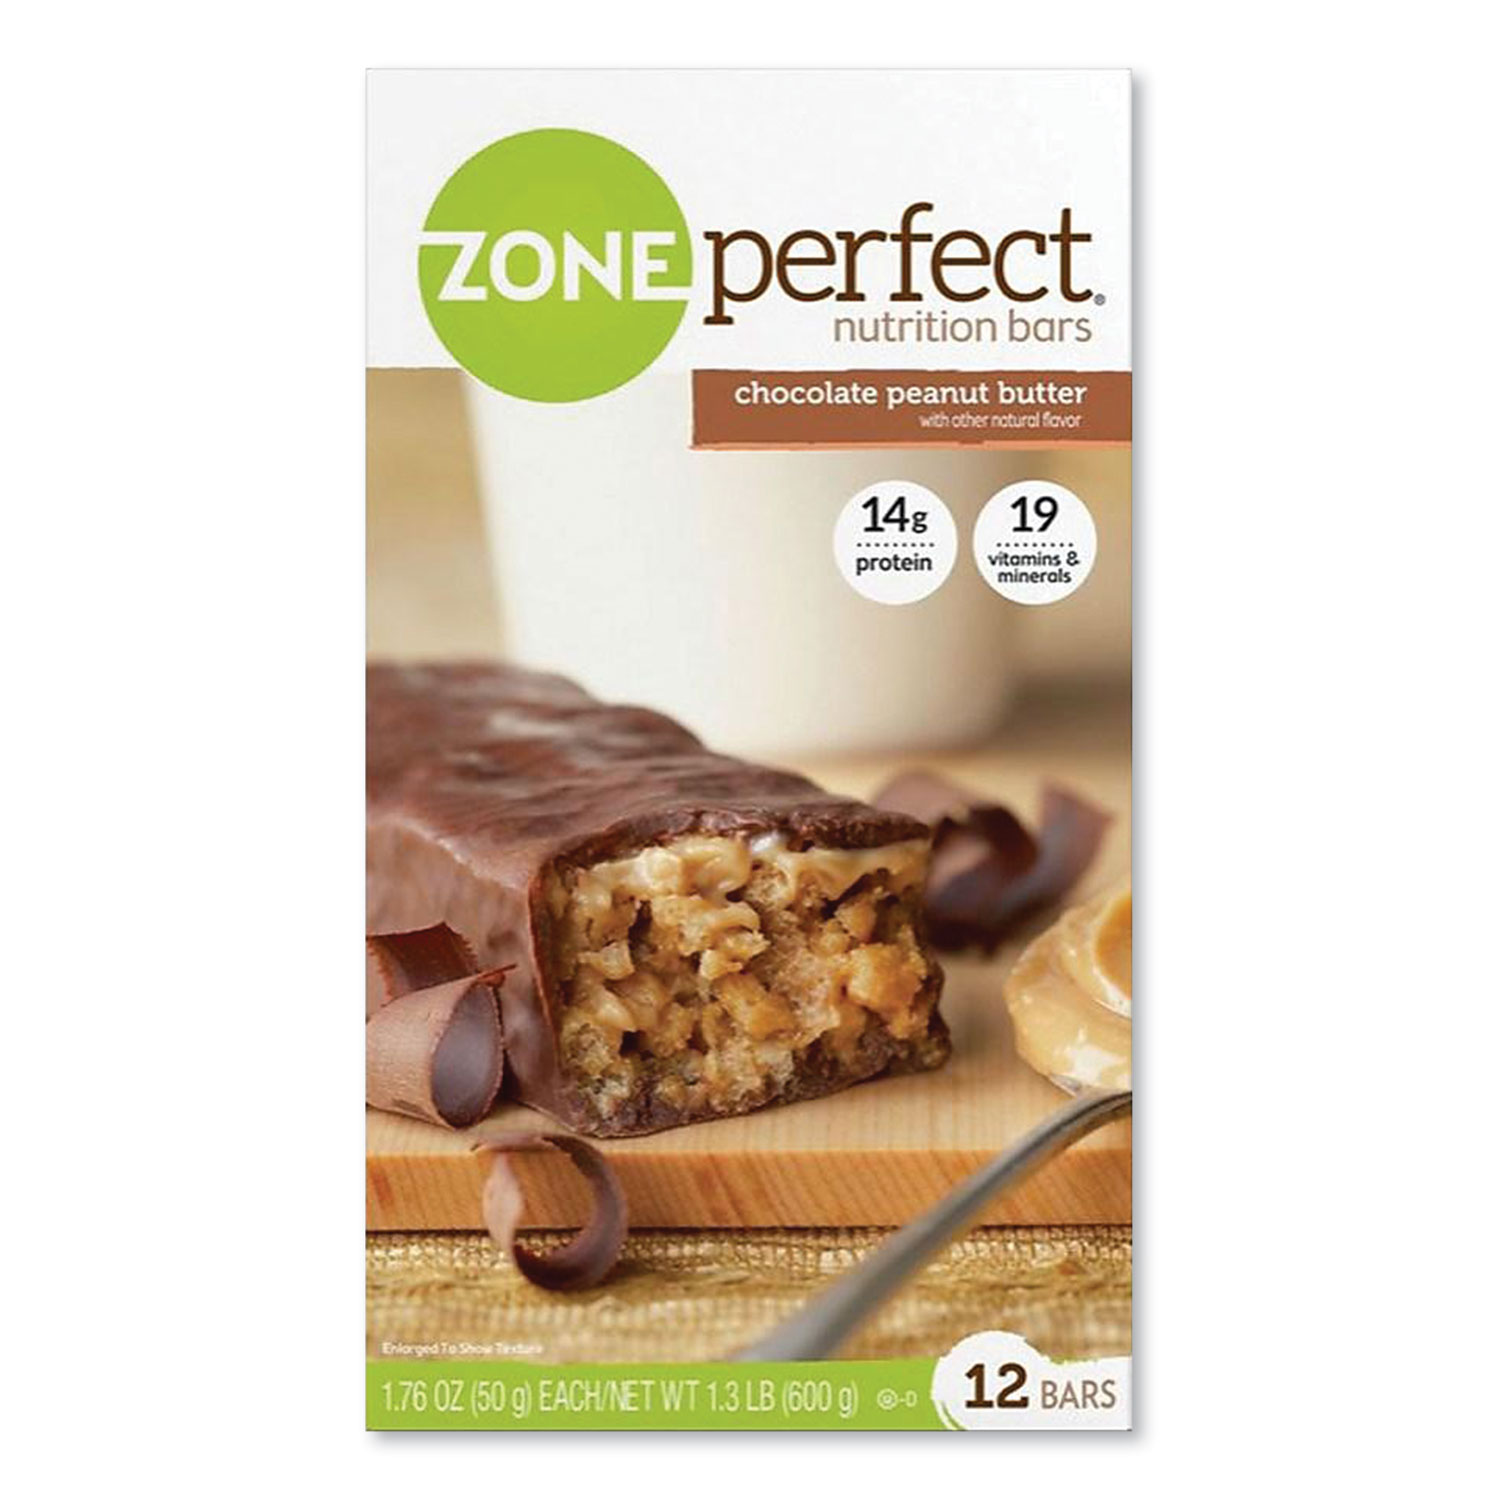 ZonePerfect Nutrition Bars, Chocolate Peanut Butter, 1.76 oz Individually Wrapped, 12/Box